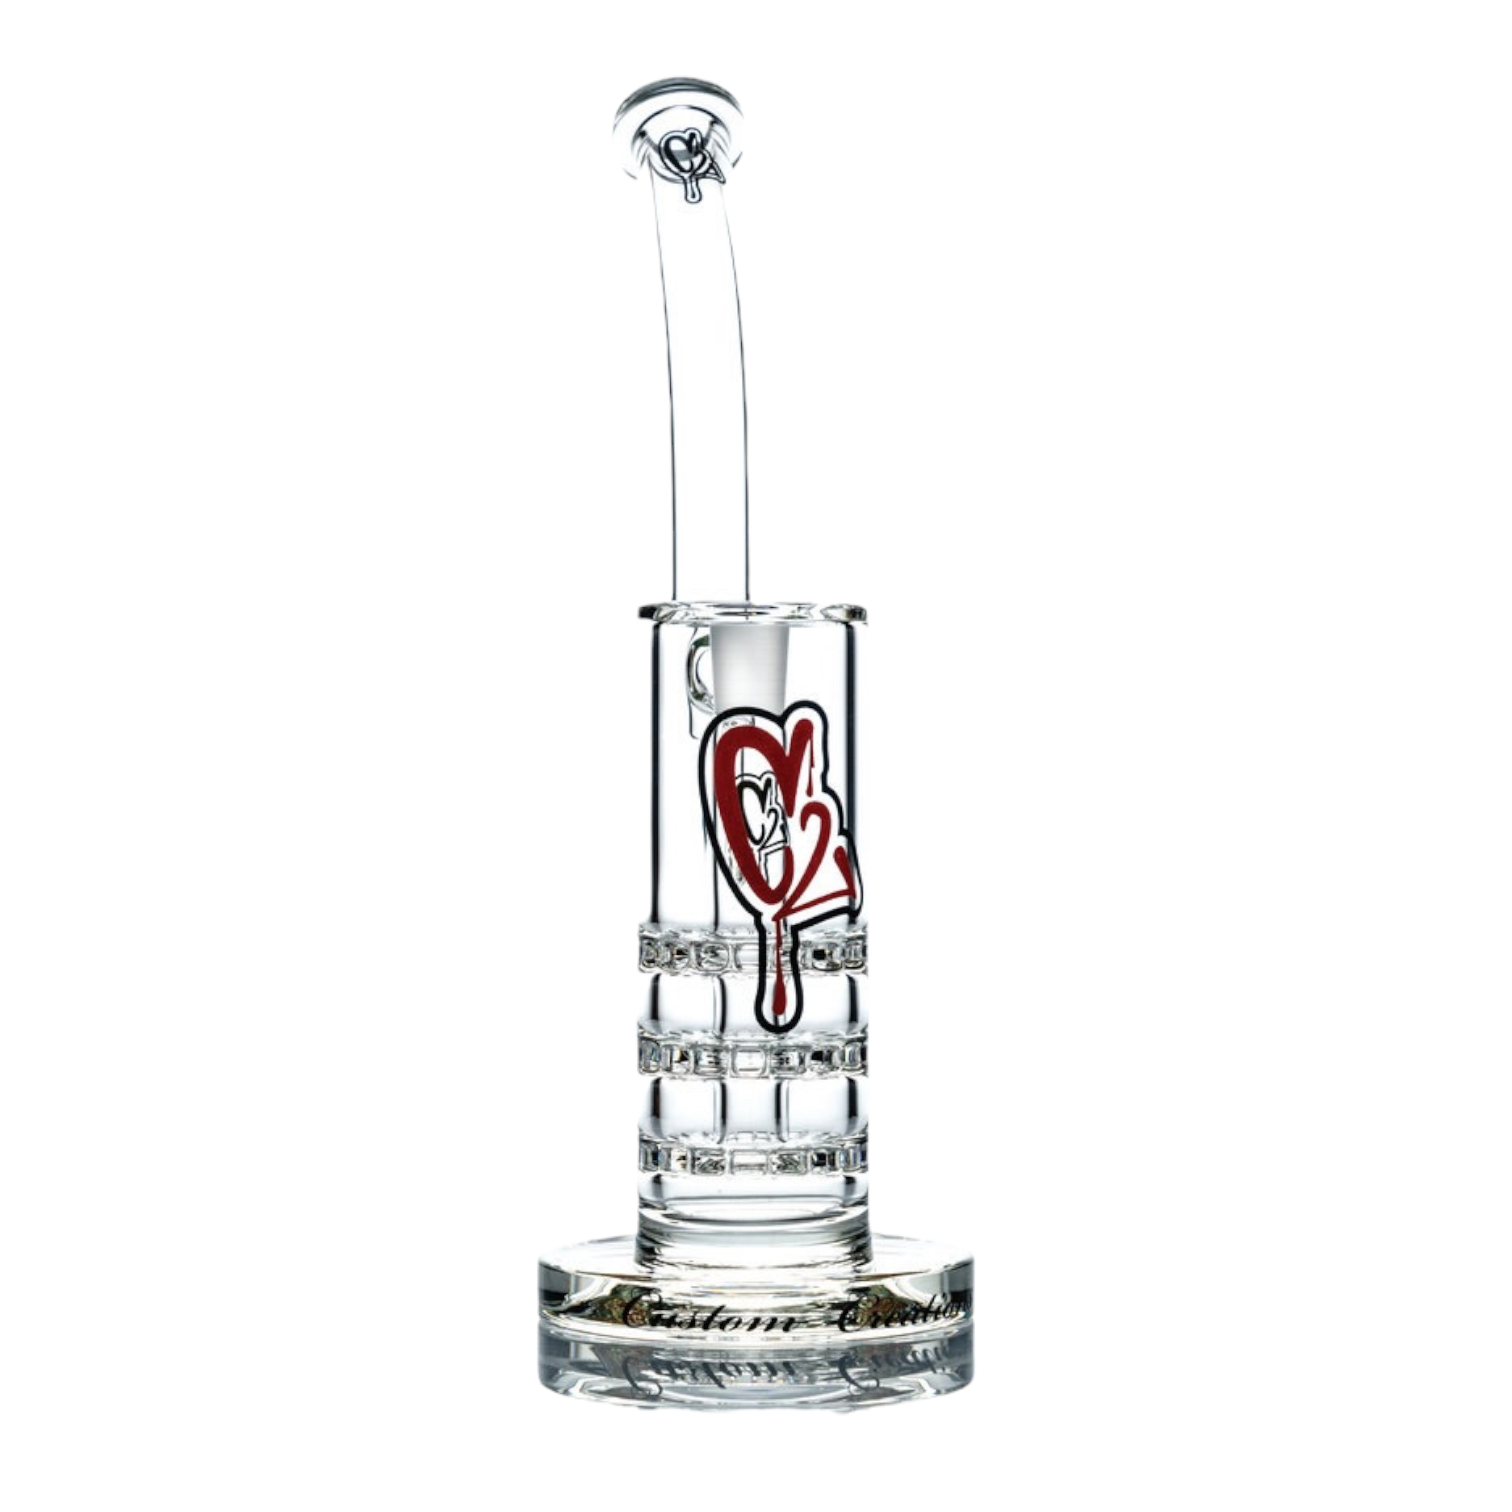 C2 Custom Creations Tall Bubbler Water Pipe - BRB 50 Triple Ratchet Perc